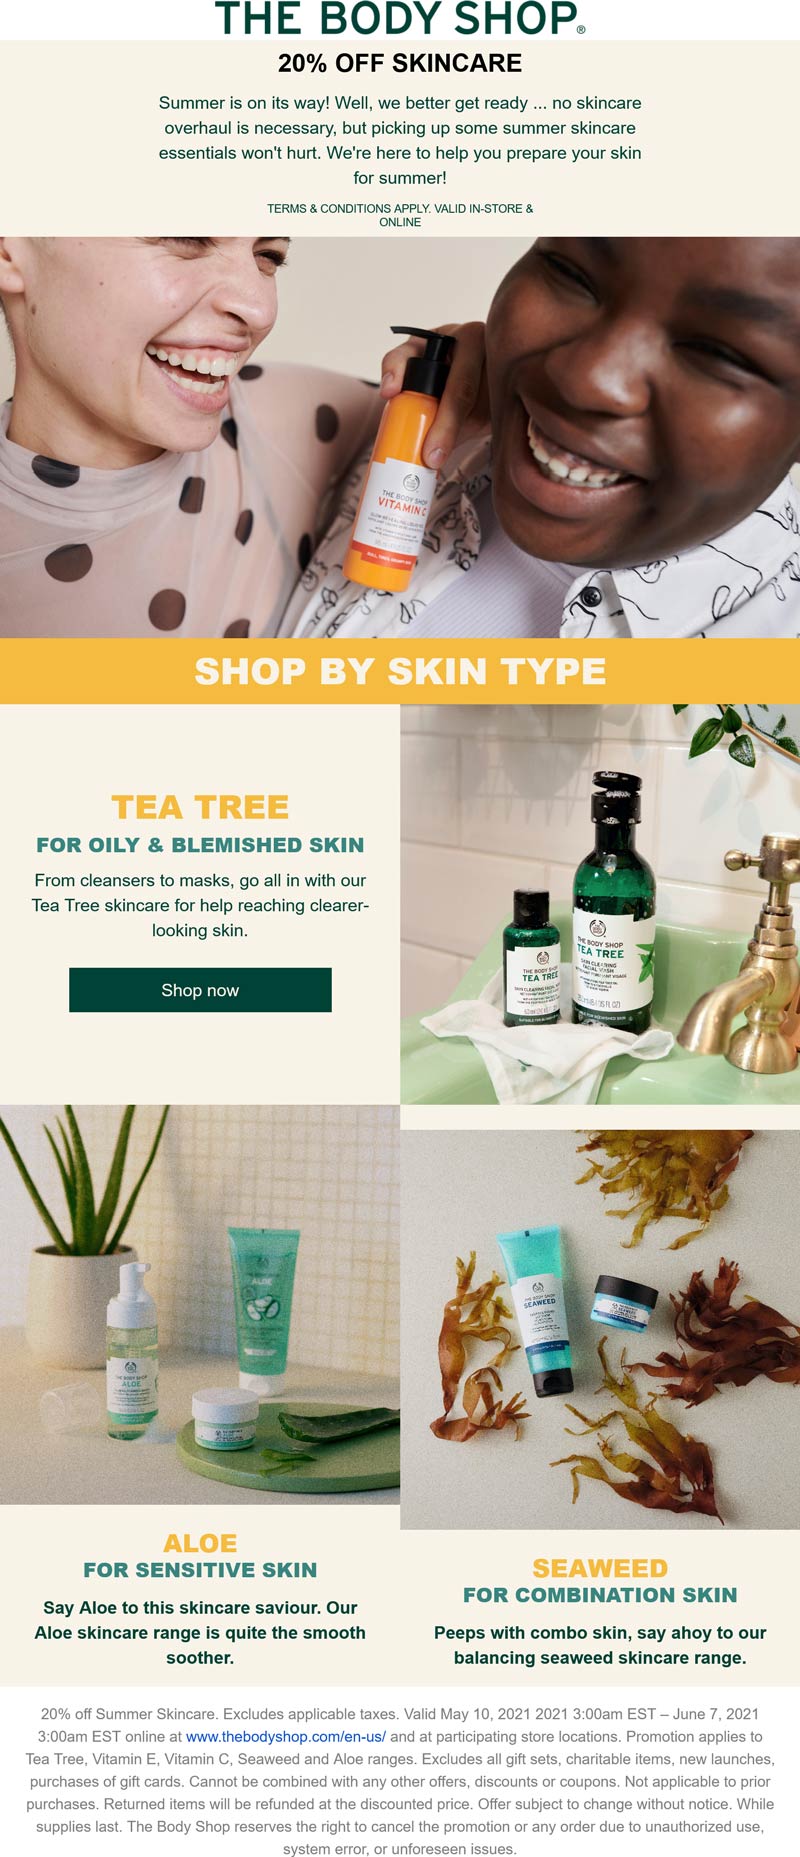 The Body Shop stores Coupon  20% off summer skincare at The Body Shop, ditto online #thebodyshop 